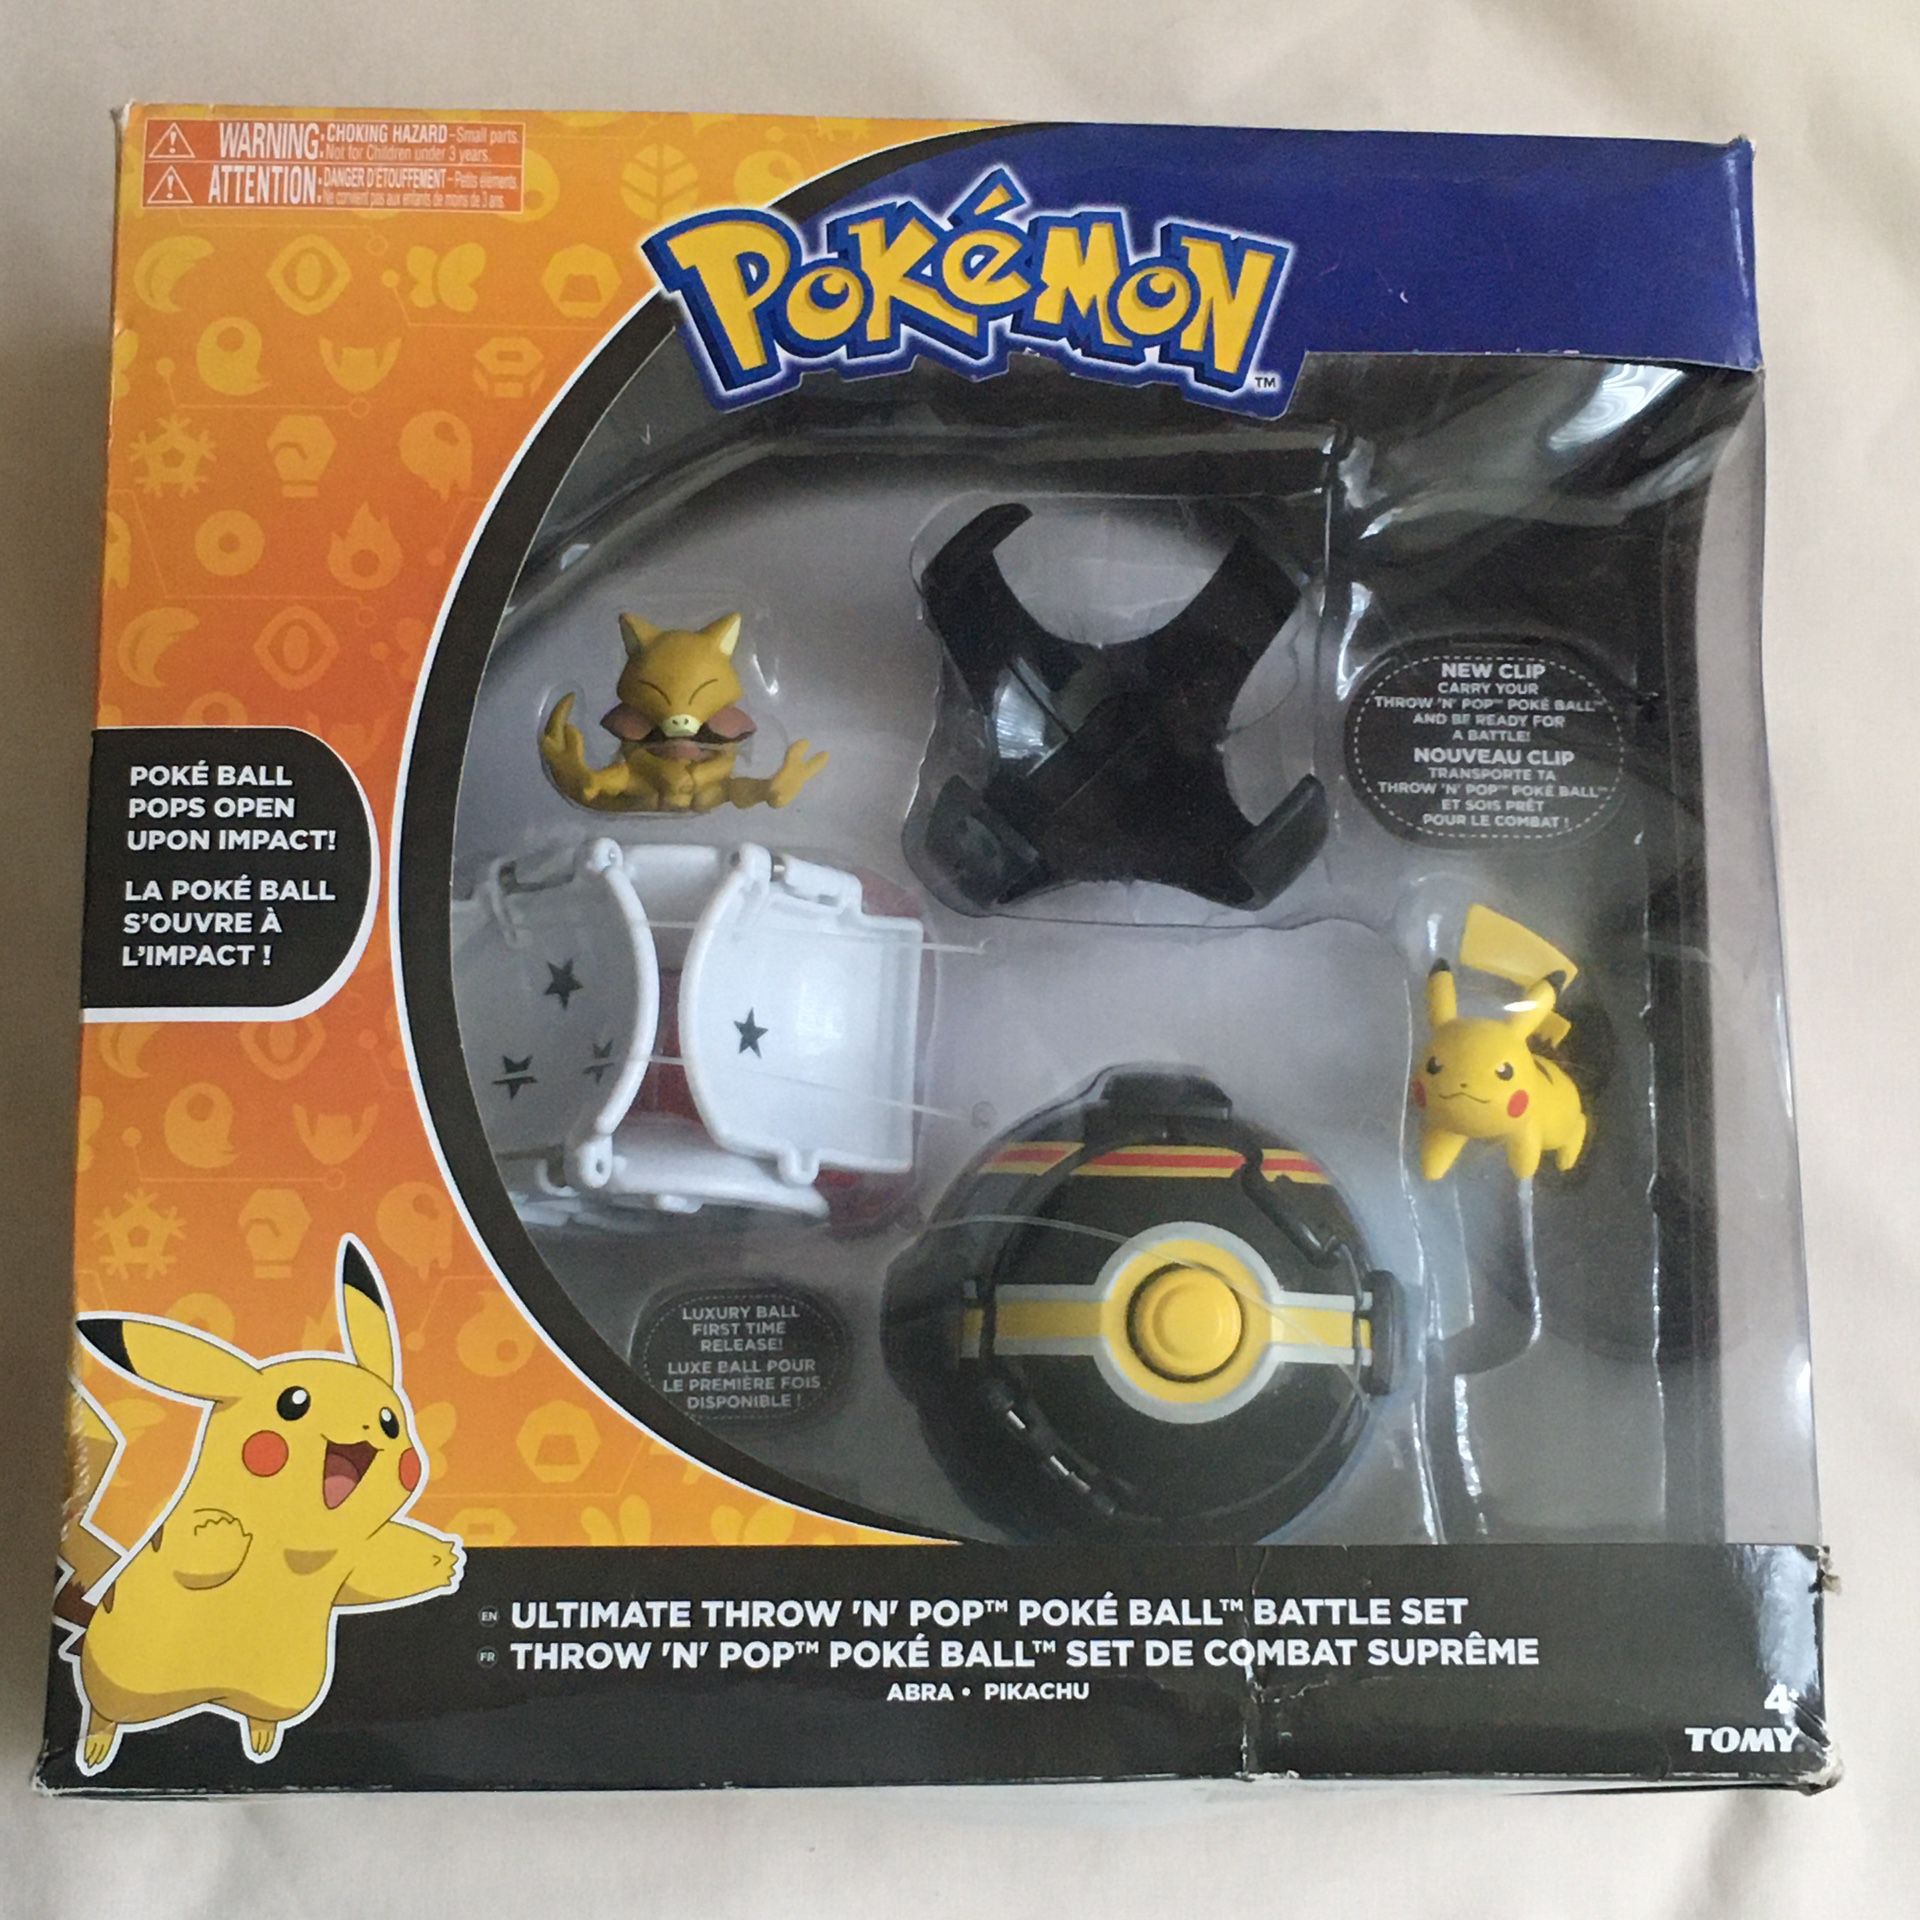 POKEMON POKE BALL PIKACHU BATTLE SET •• PRICE is FIRM •• see More HOT TOYS here ....